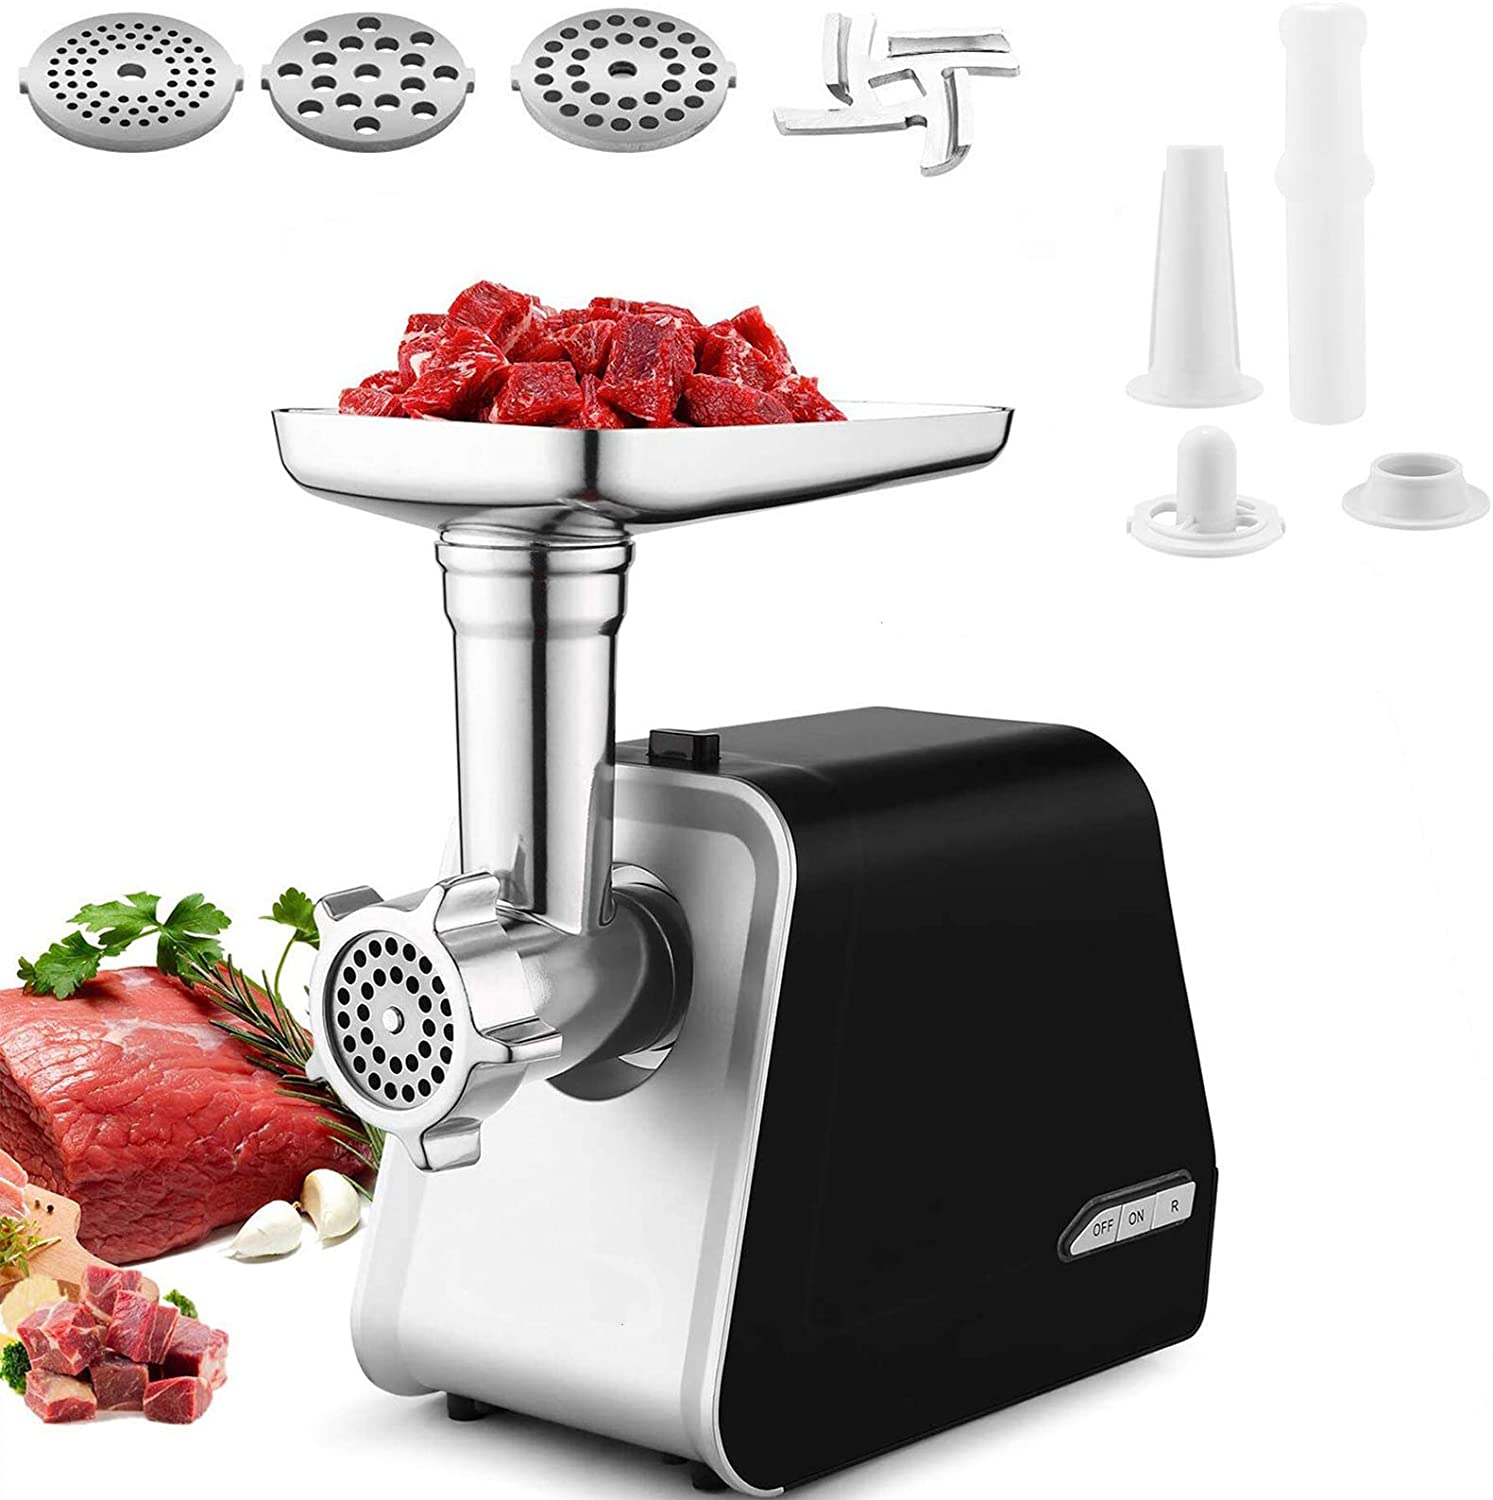 COOCHEER Stainless Steel Meat Grinder, Electric Meat Grinder, Sausage Filler with 3 Grinding Plates, Blade And Cube Attachment, ETL Approved